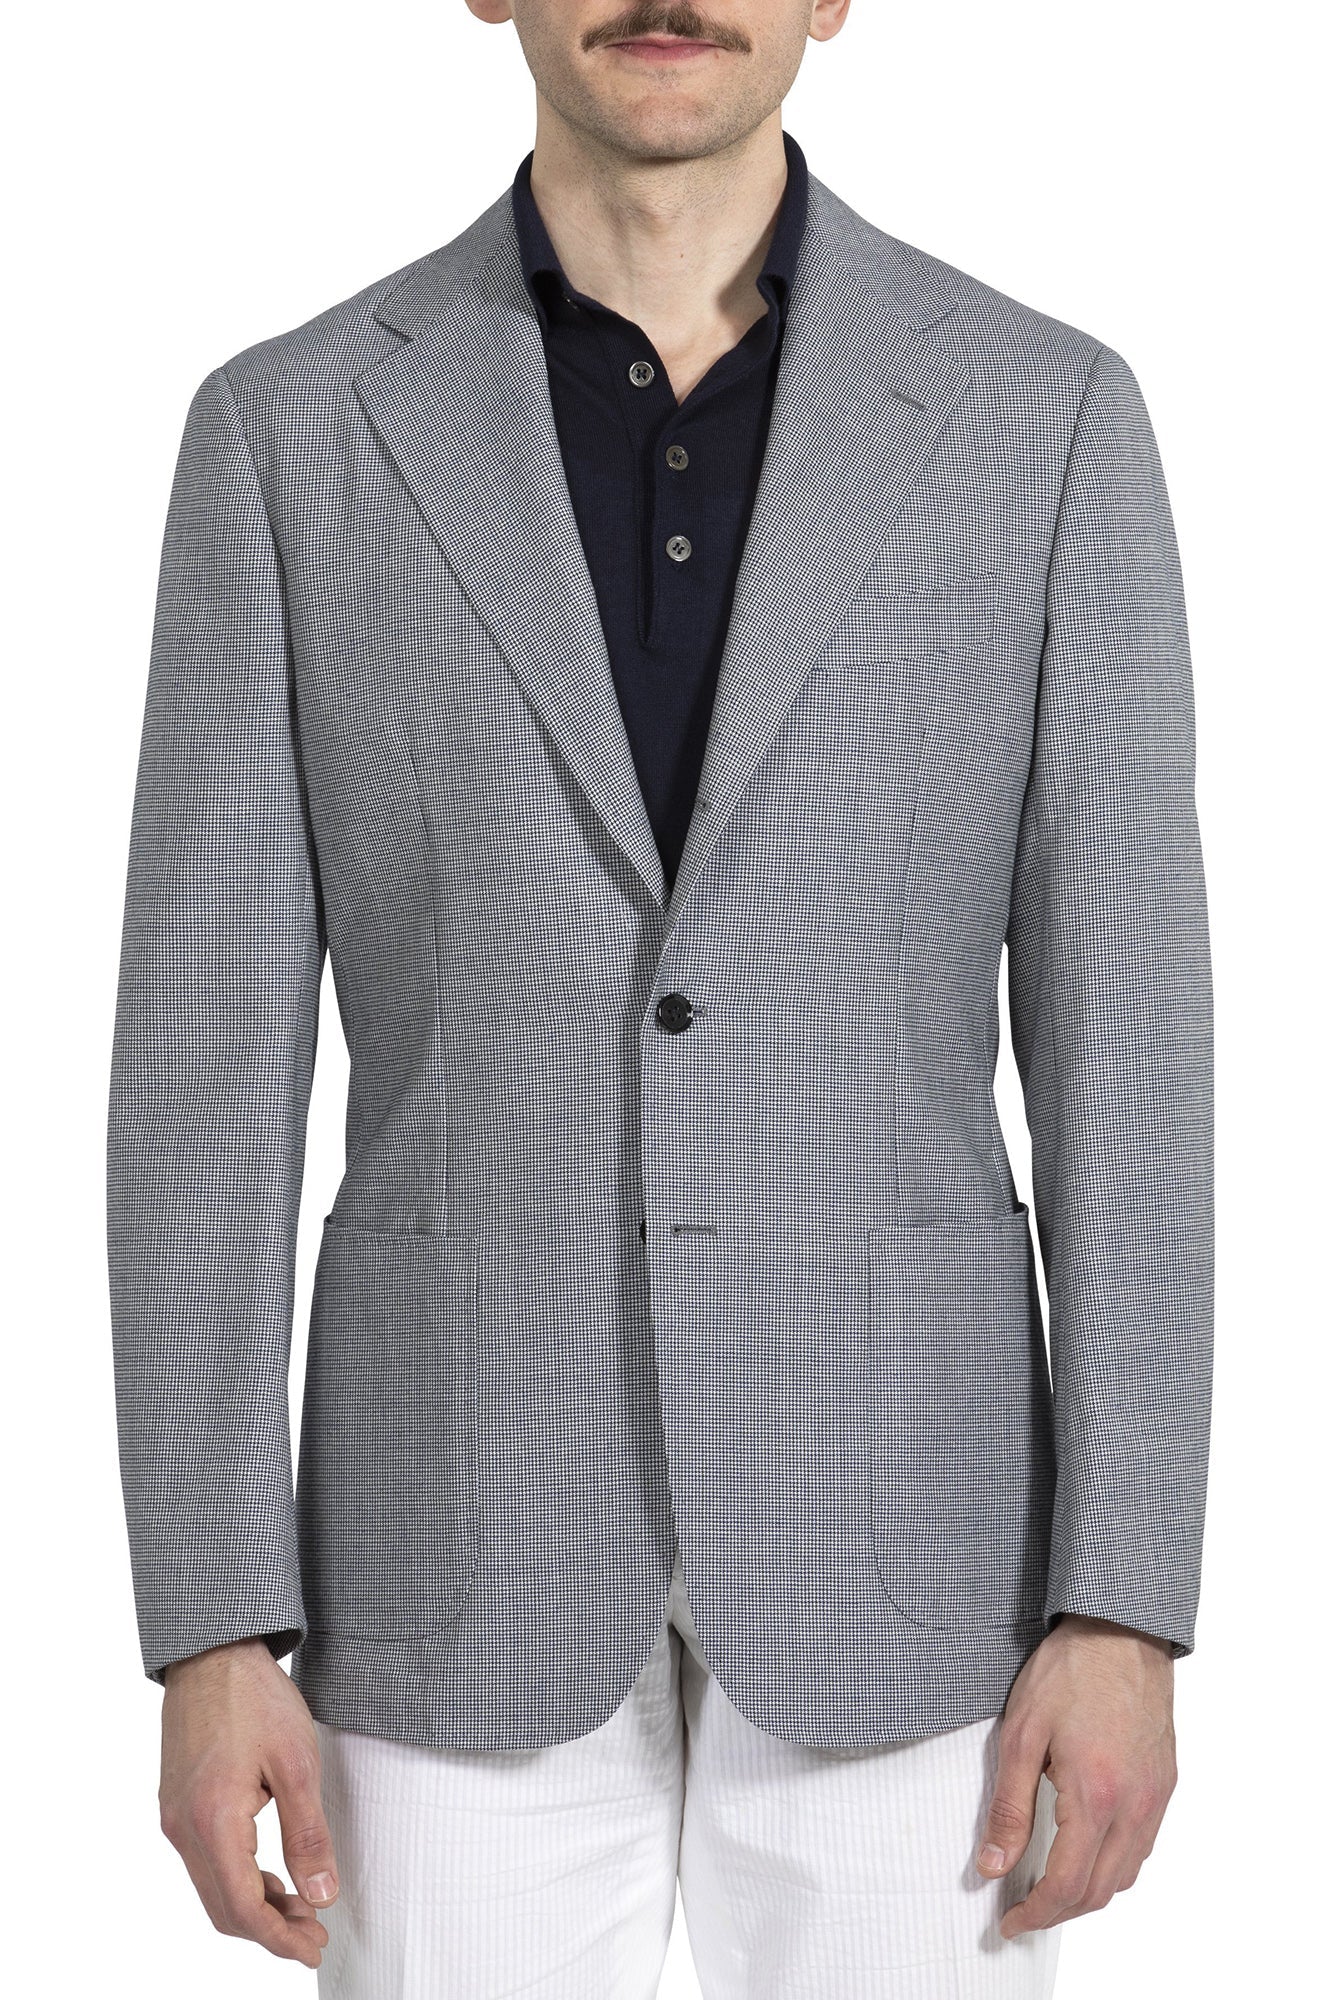 The Armoury by Ring Jacket Model 3 Navy/White Wool Puppytooth Sport Coat